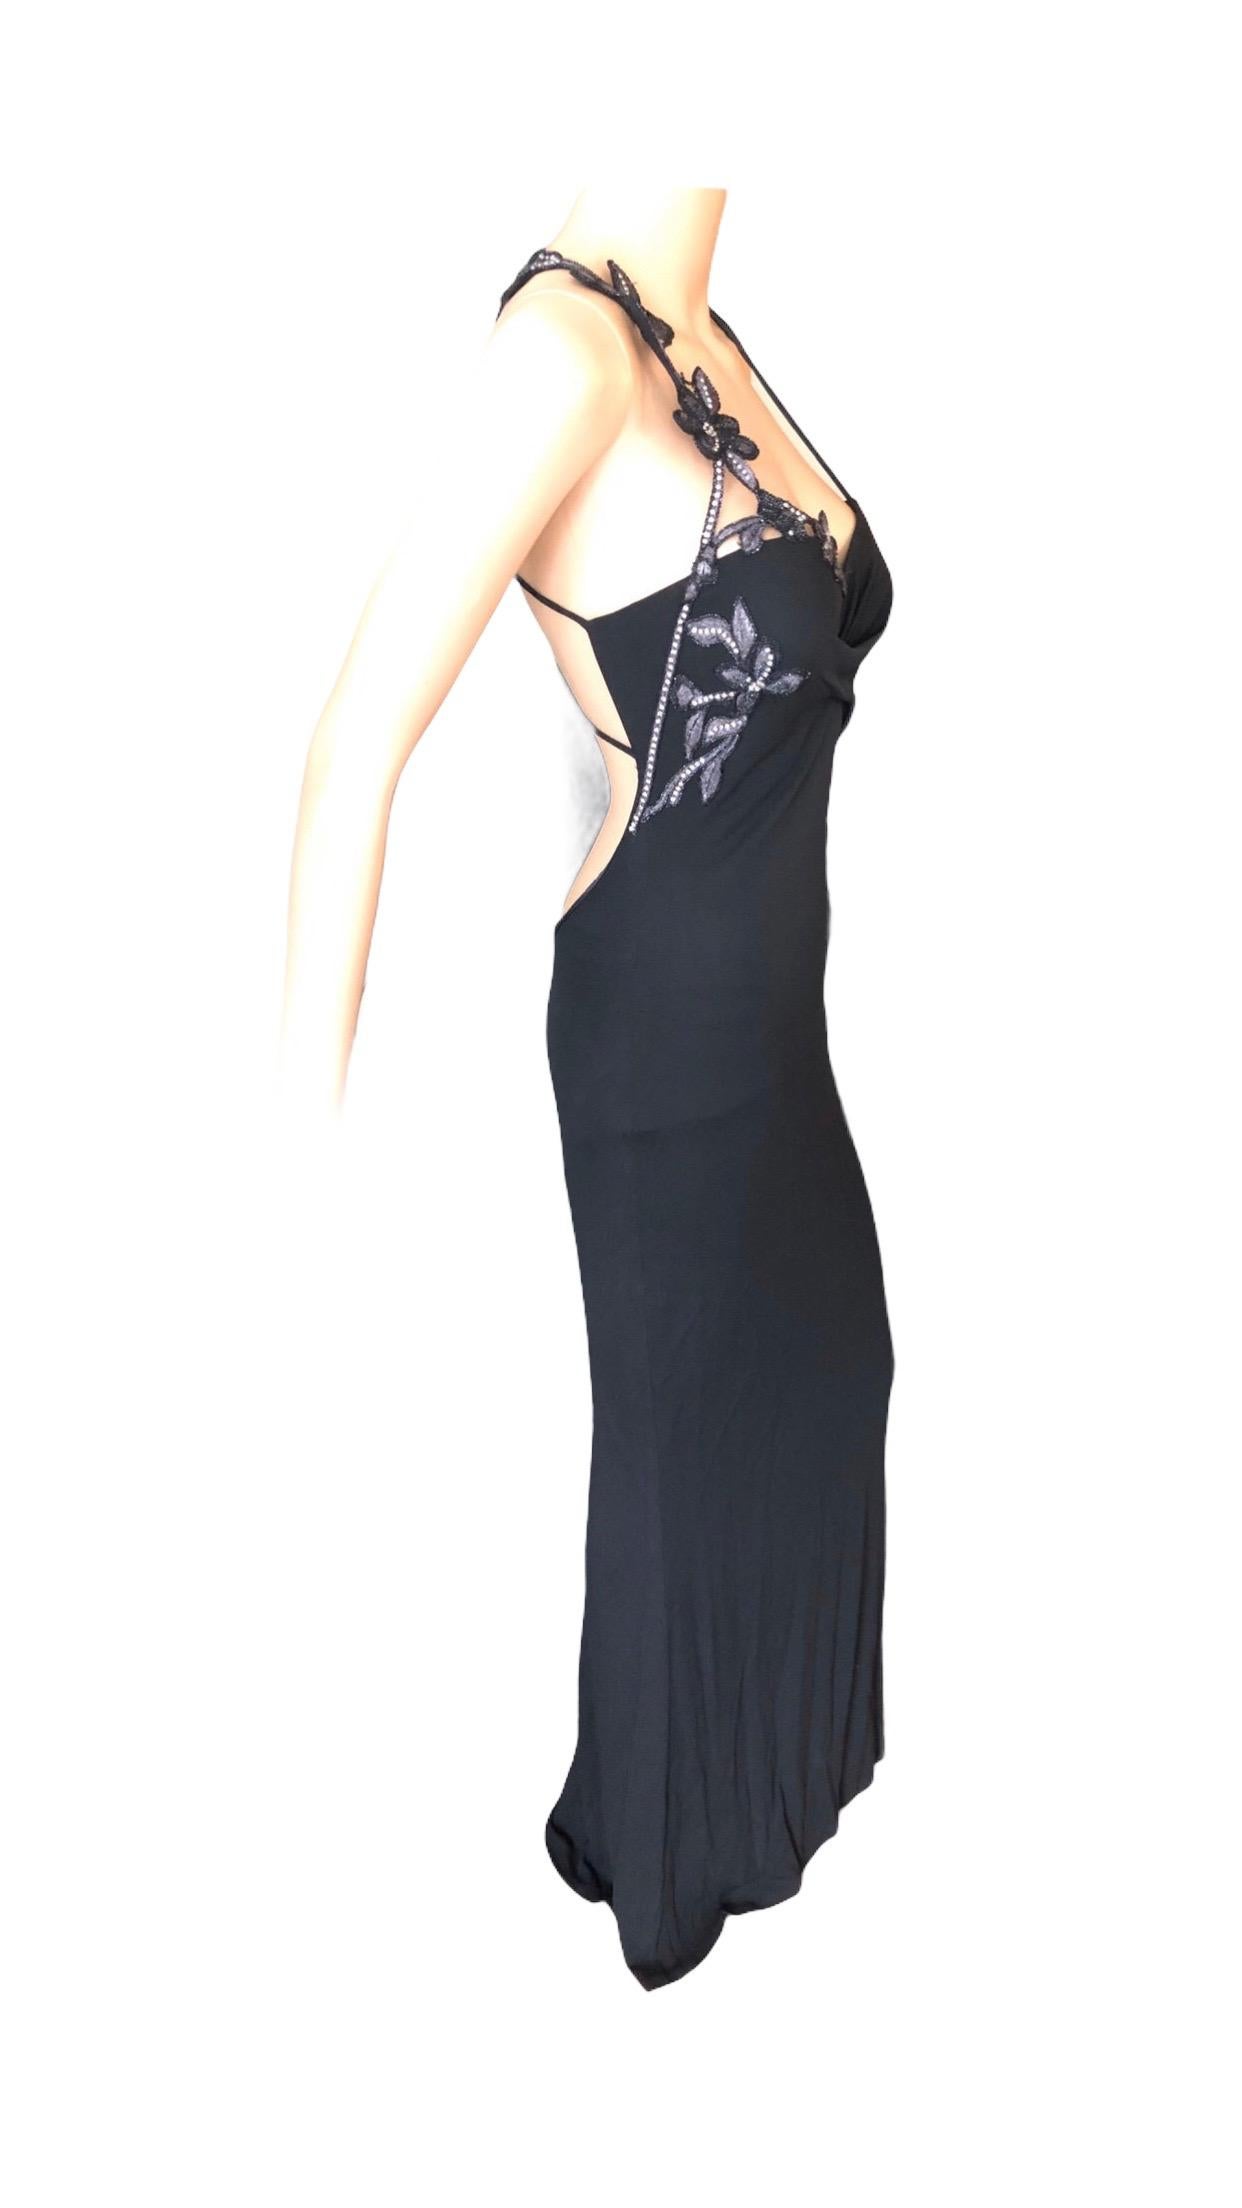 Atelier Versace by Gianni Versace Haute Couture Embellished Evening Dress Gown For Sale 4